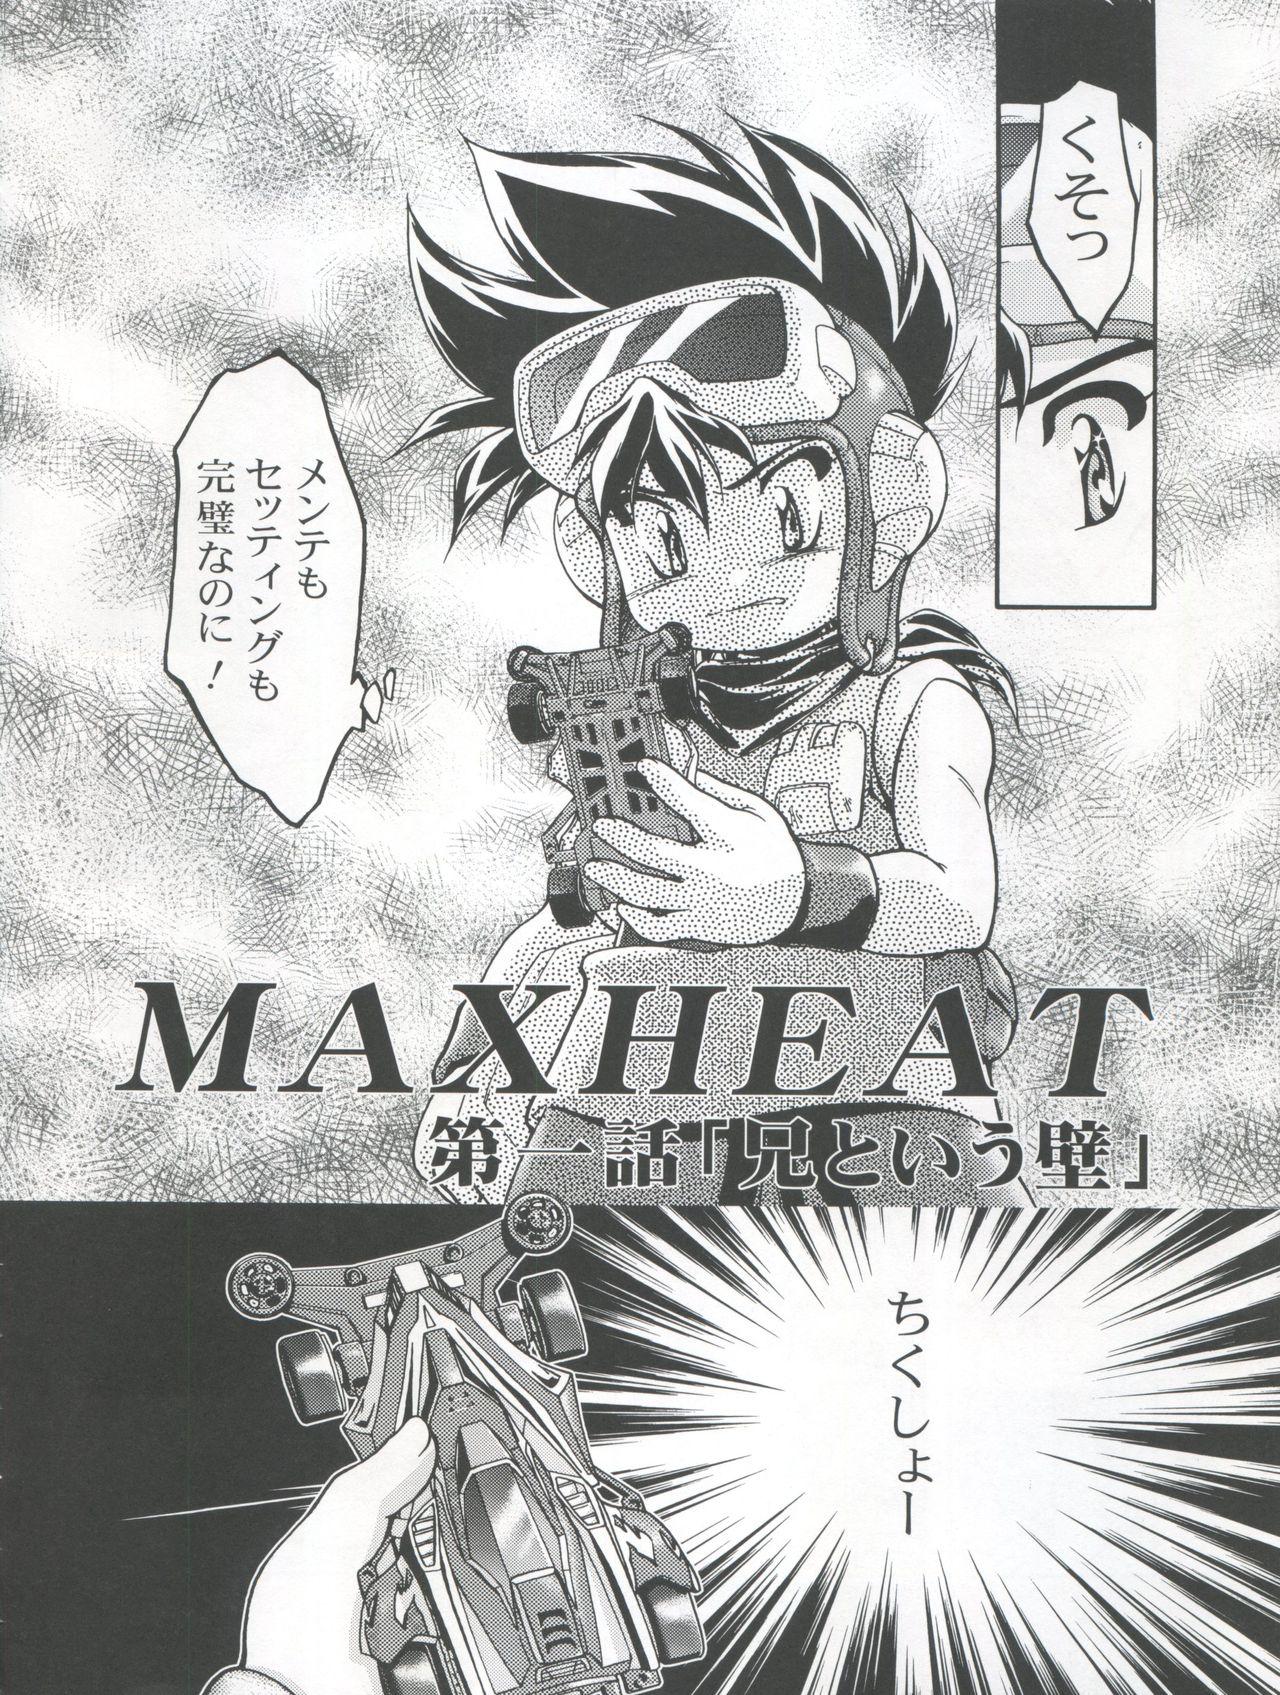 Milk Let's Ra Mix 3 MAX HEAT - Bakusou kyoudai lets and go Teenpussy - Page 6